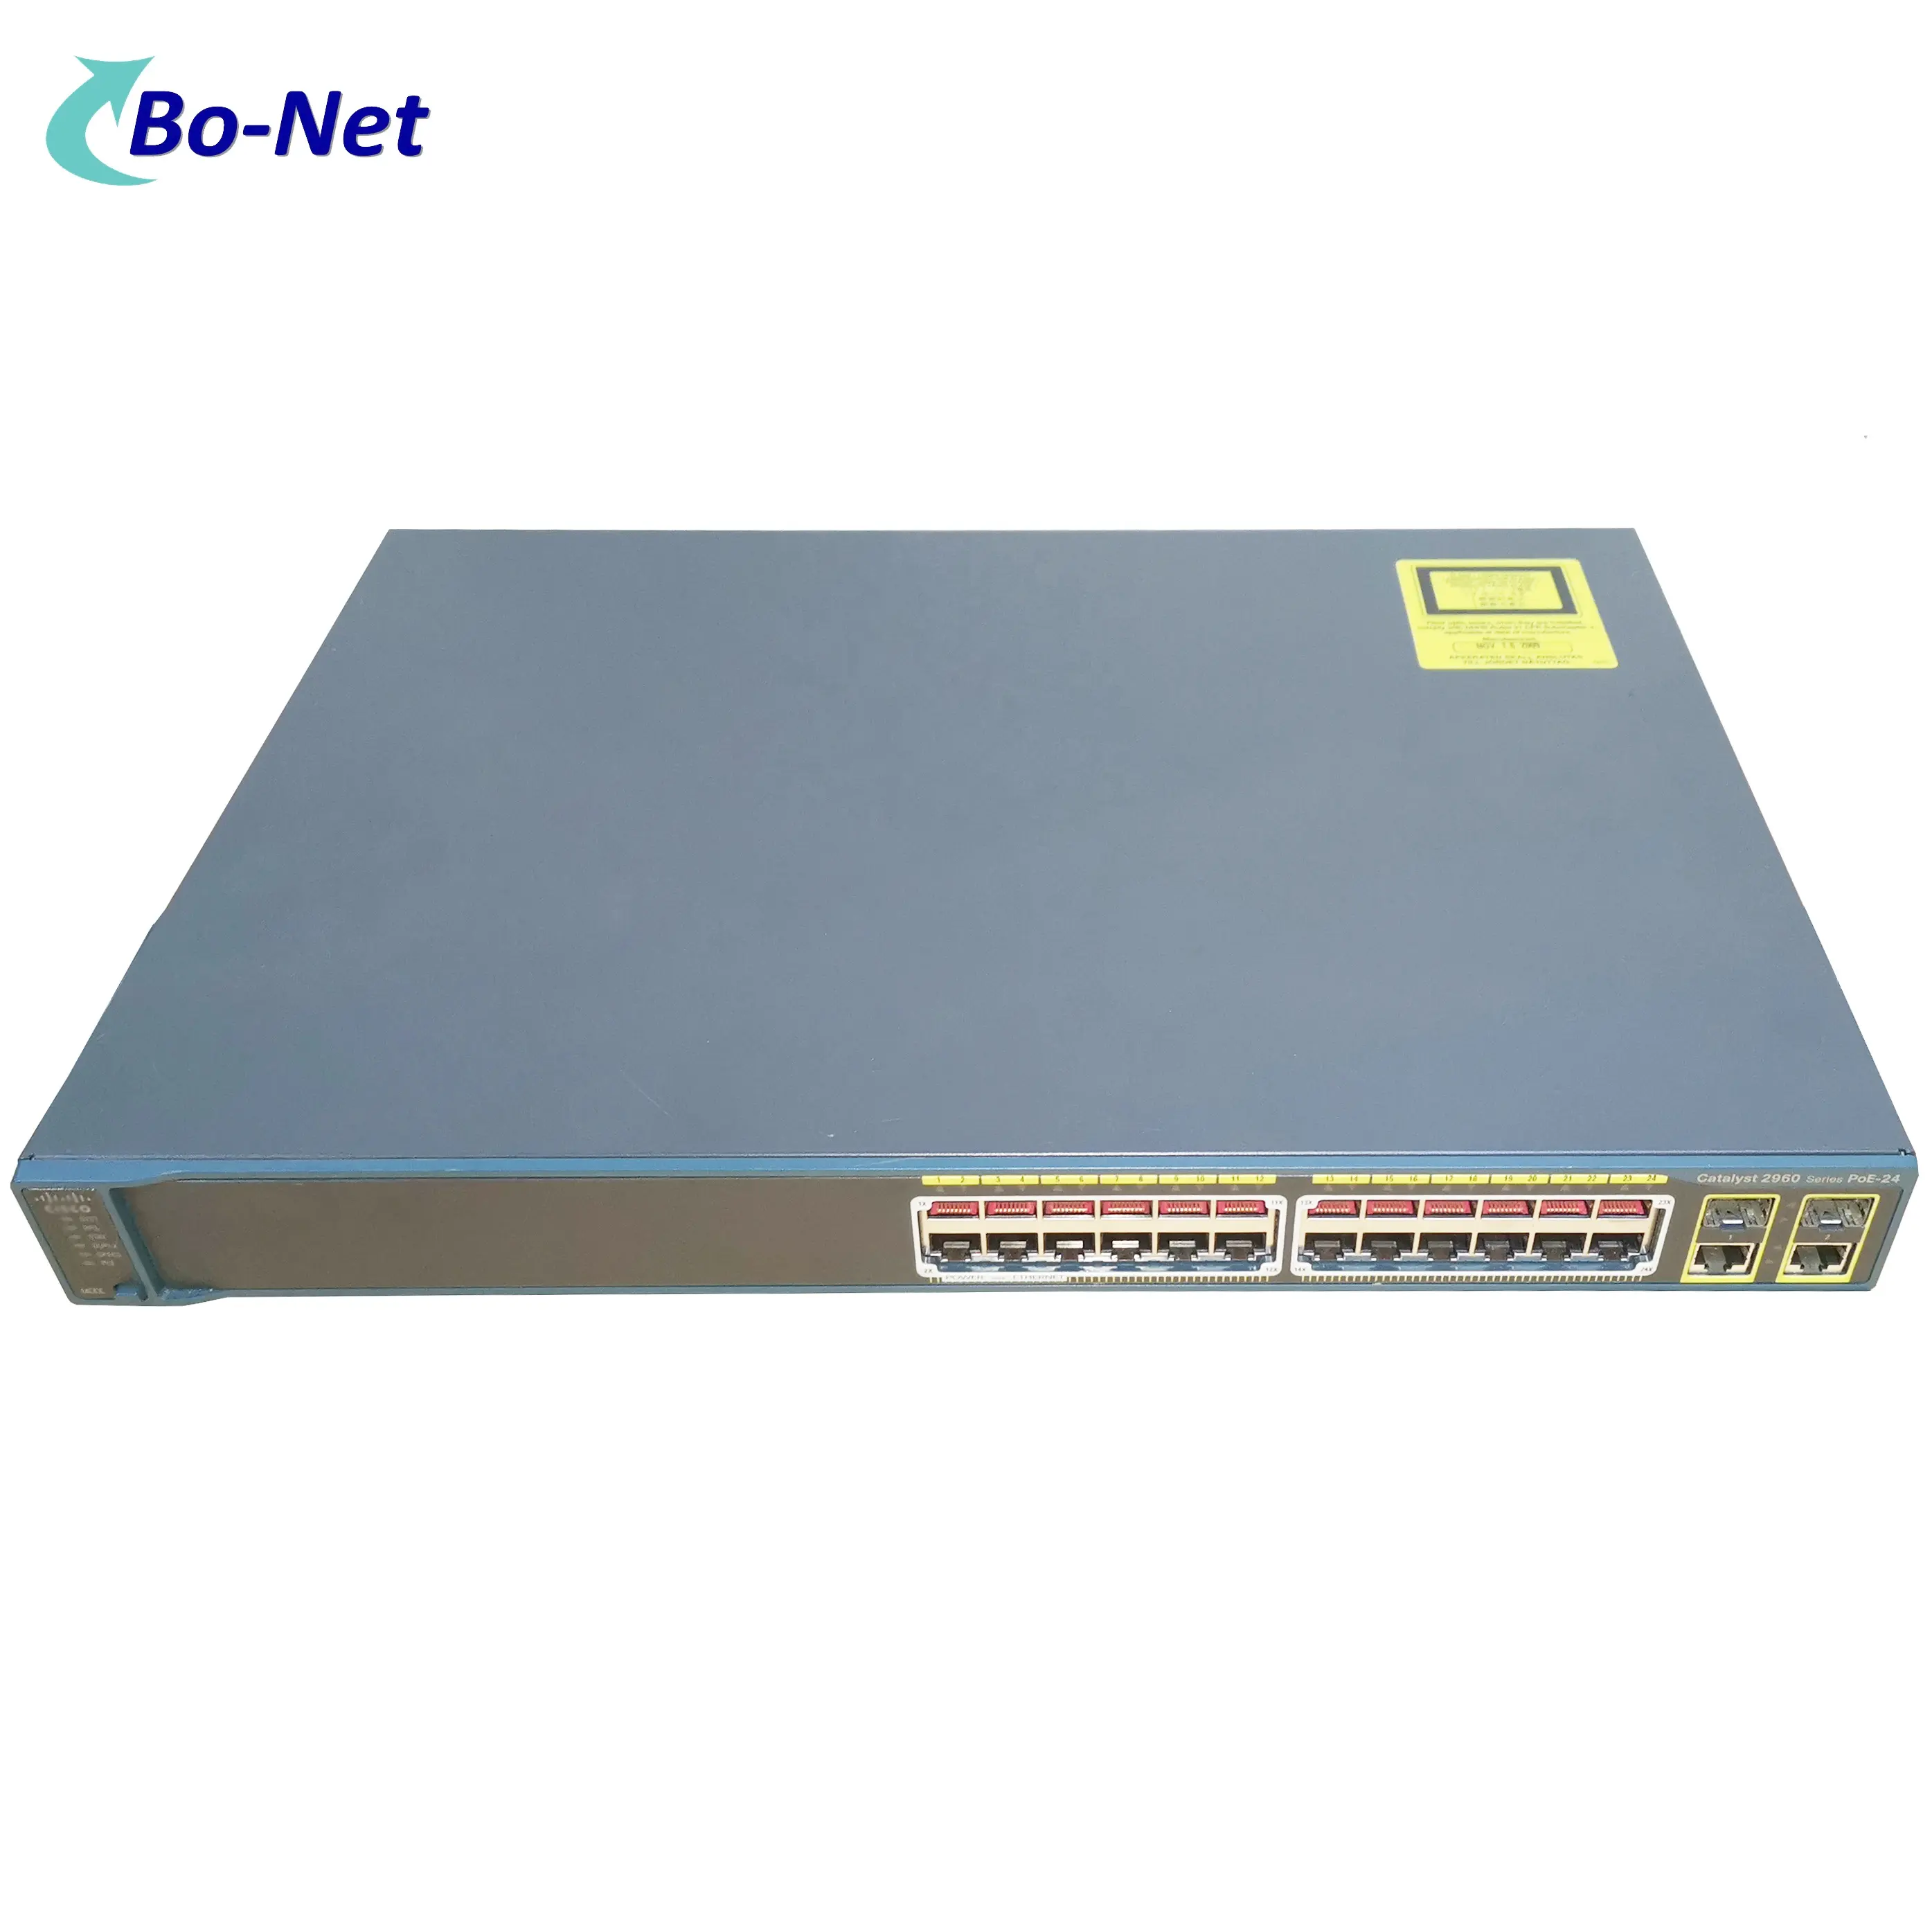 Used WS-C2960-24PC-L 24 Ports PoE Ethernet Managed Network Switch